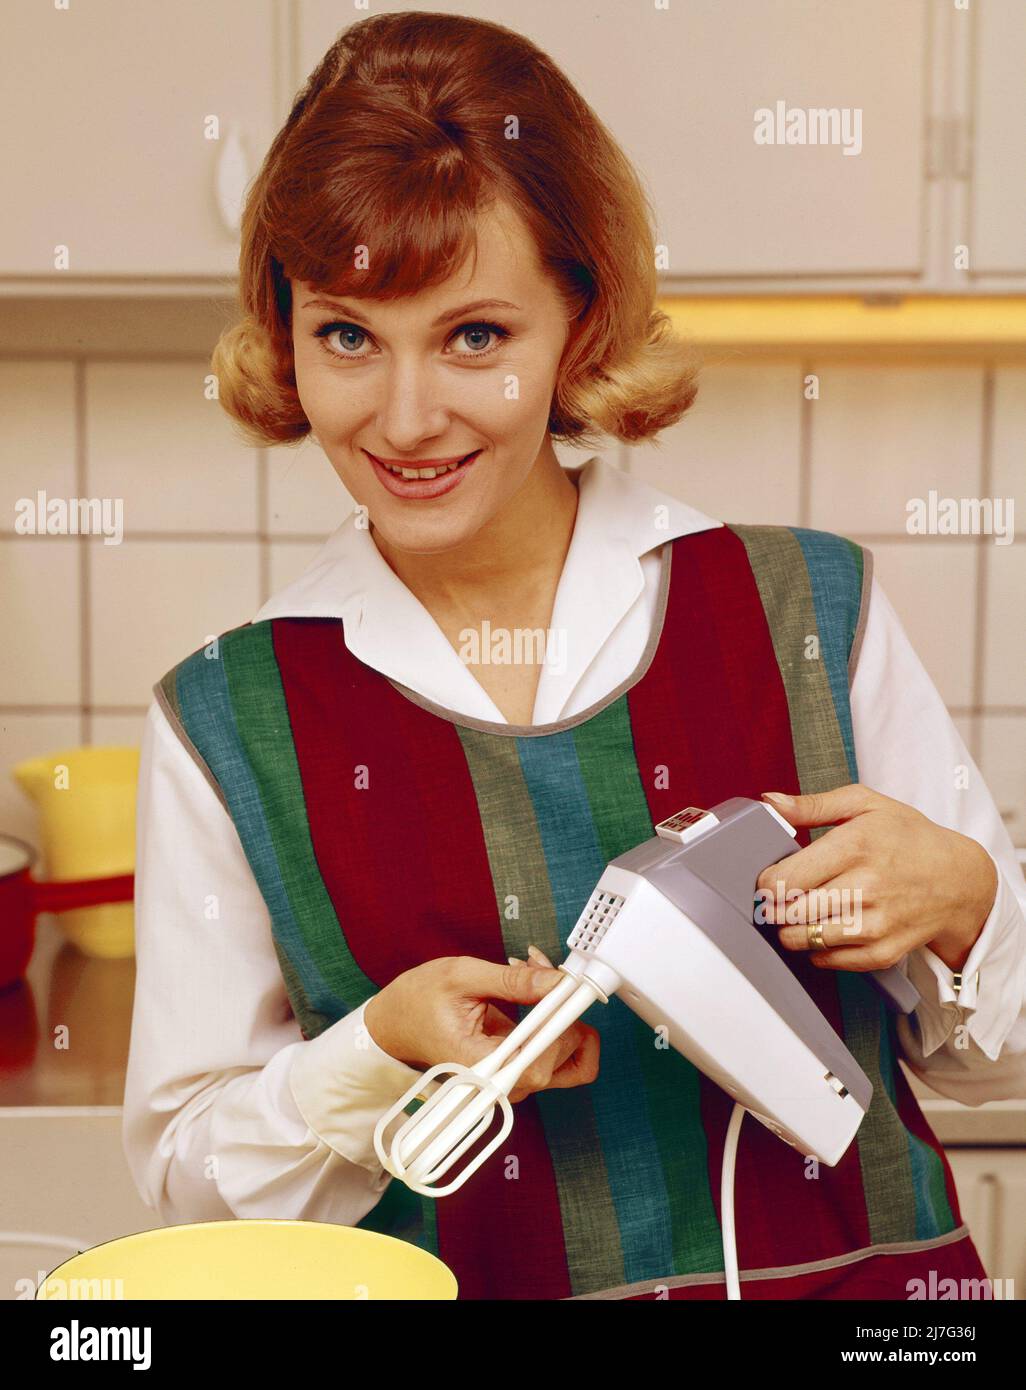 In the 1960s. A young woman pictured in the kitchen using an electric hand mixer. Stock Photo